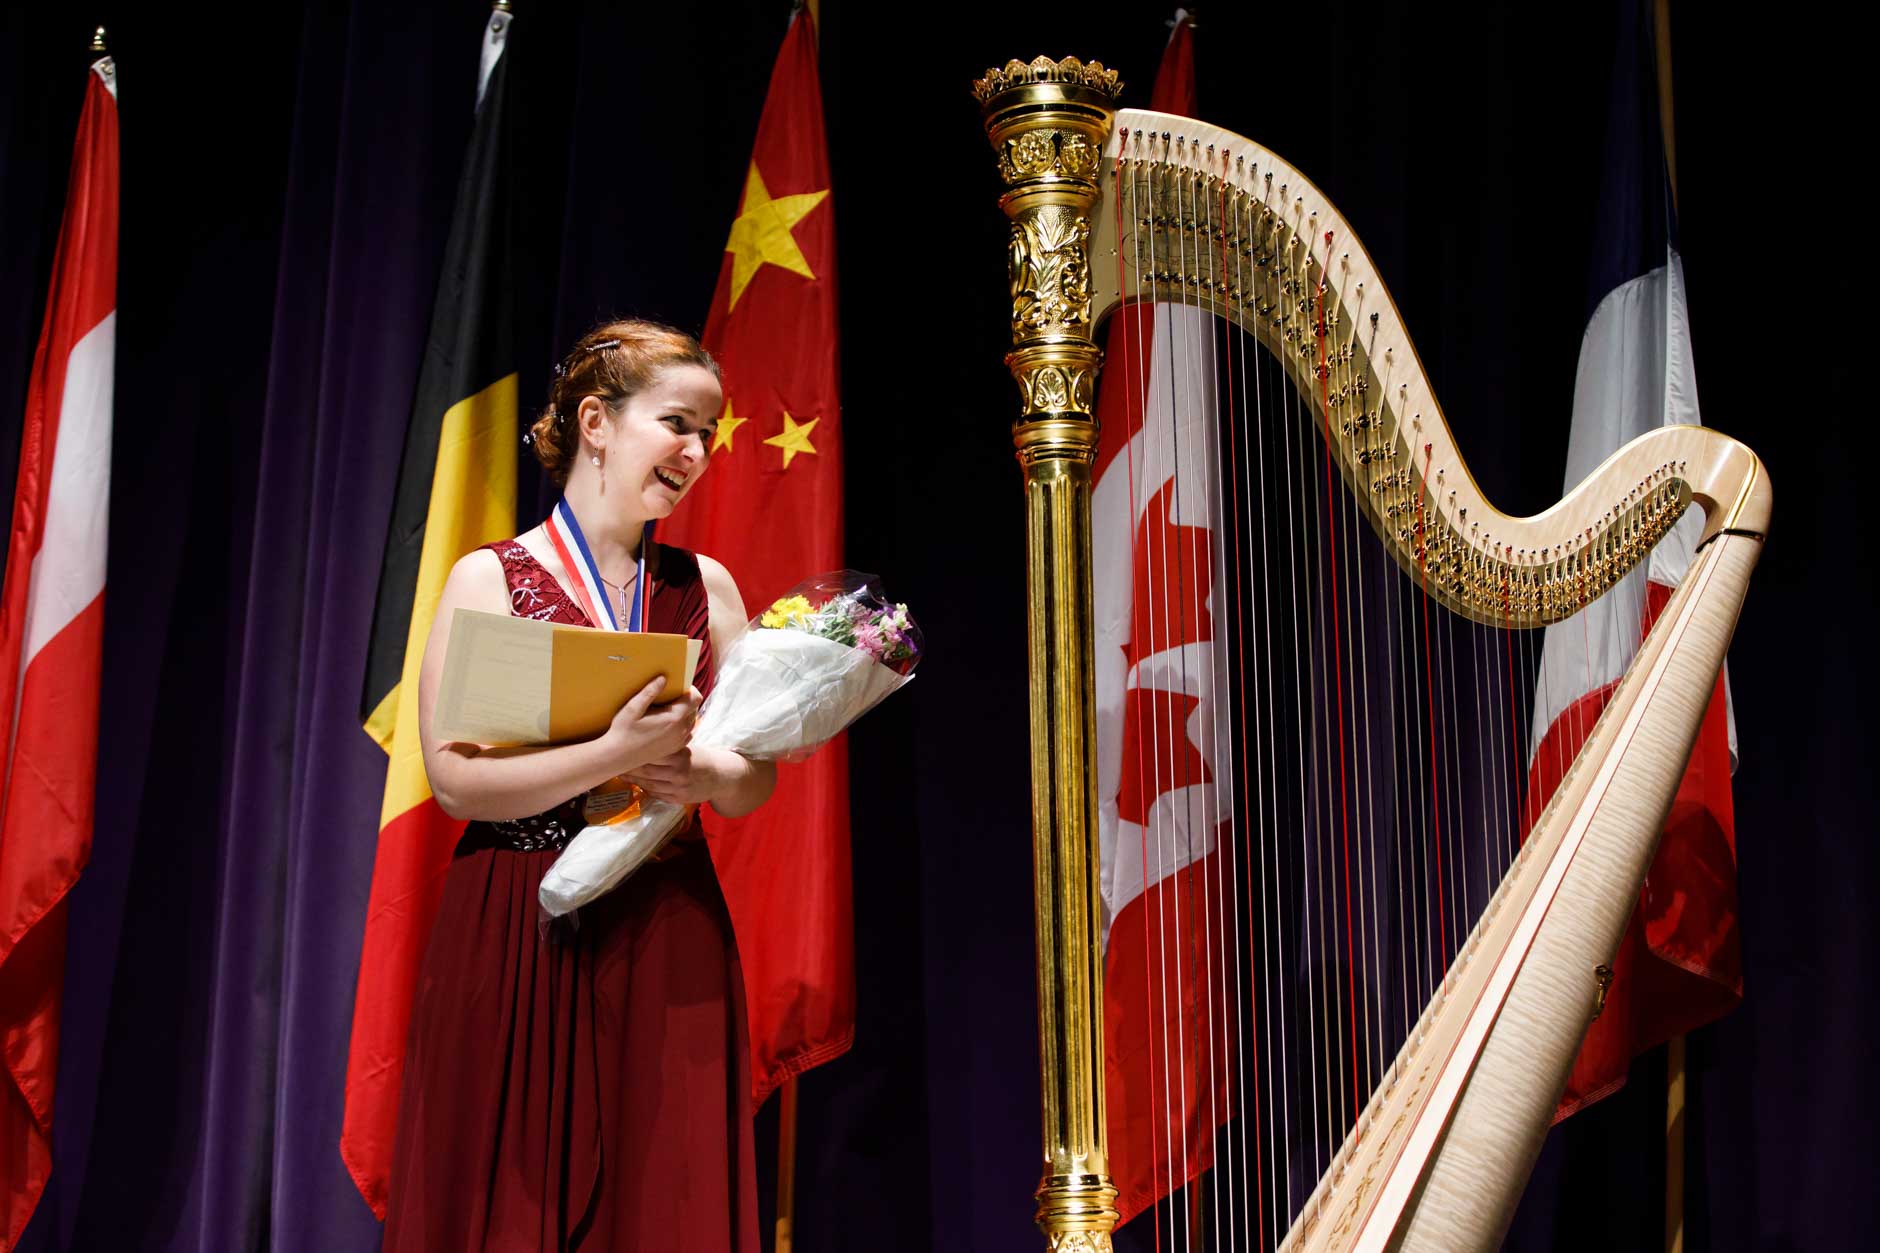 First prize winner Melanie Laurent from France receives the Lyon and Healy Concert Grand Harp during the awards ceremony of the 11th USA International Harp Competition at Indiana University in Bloomington, Indiana on Saturday, July 13, 2019. (Photo by James Brosher)